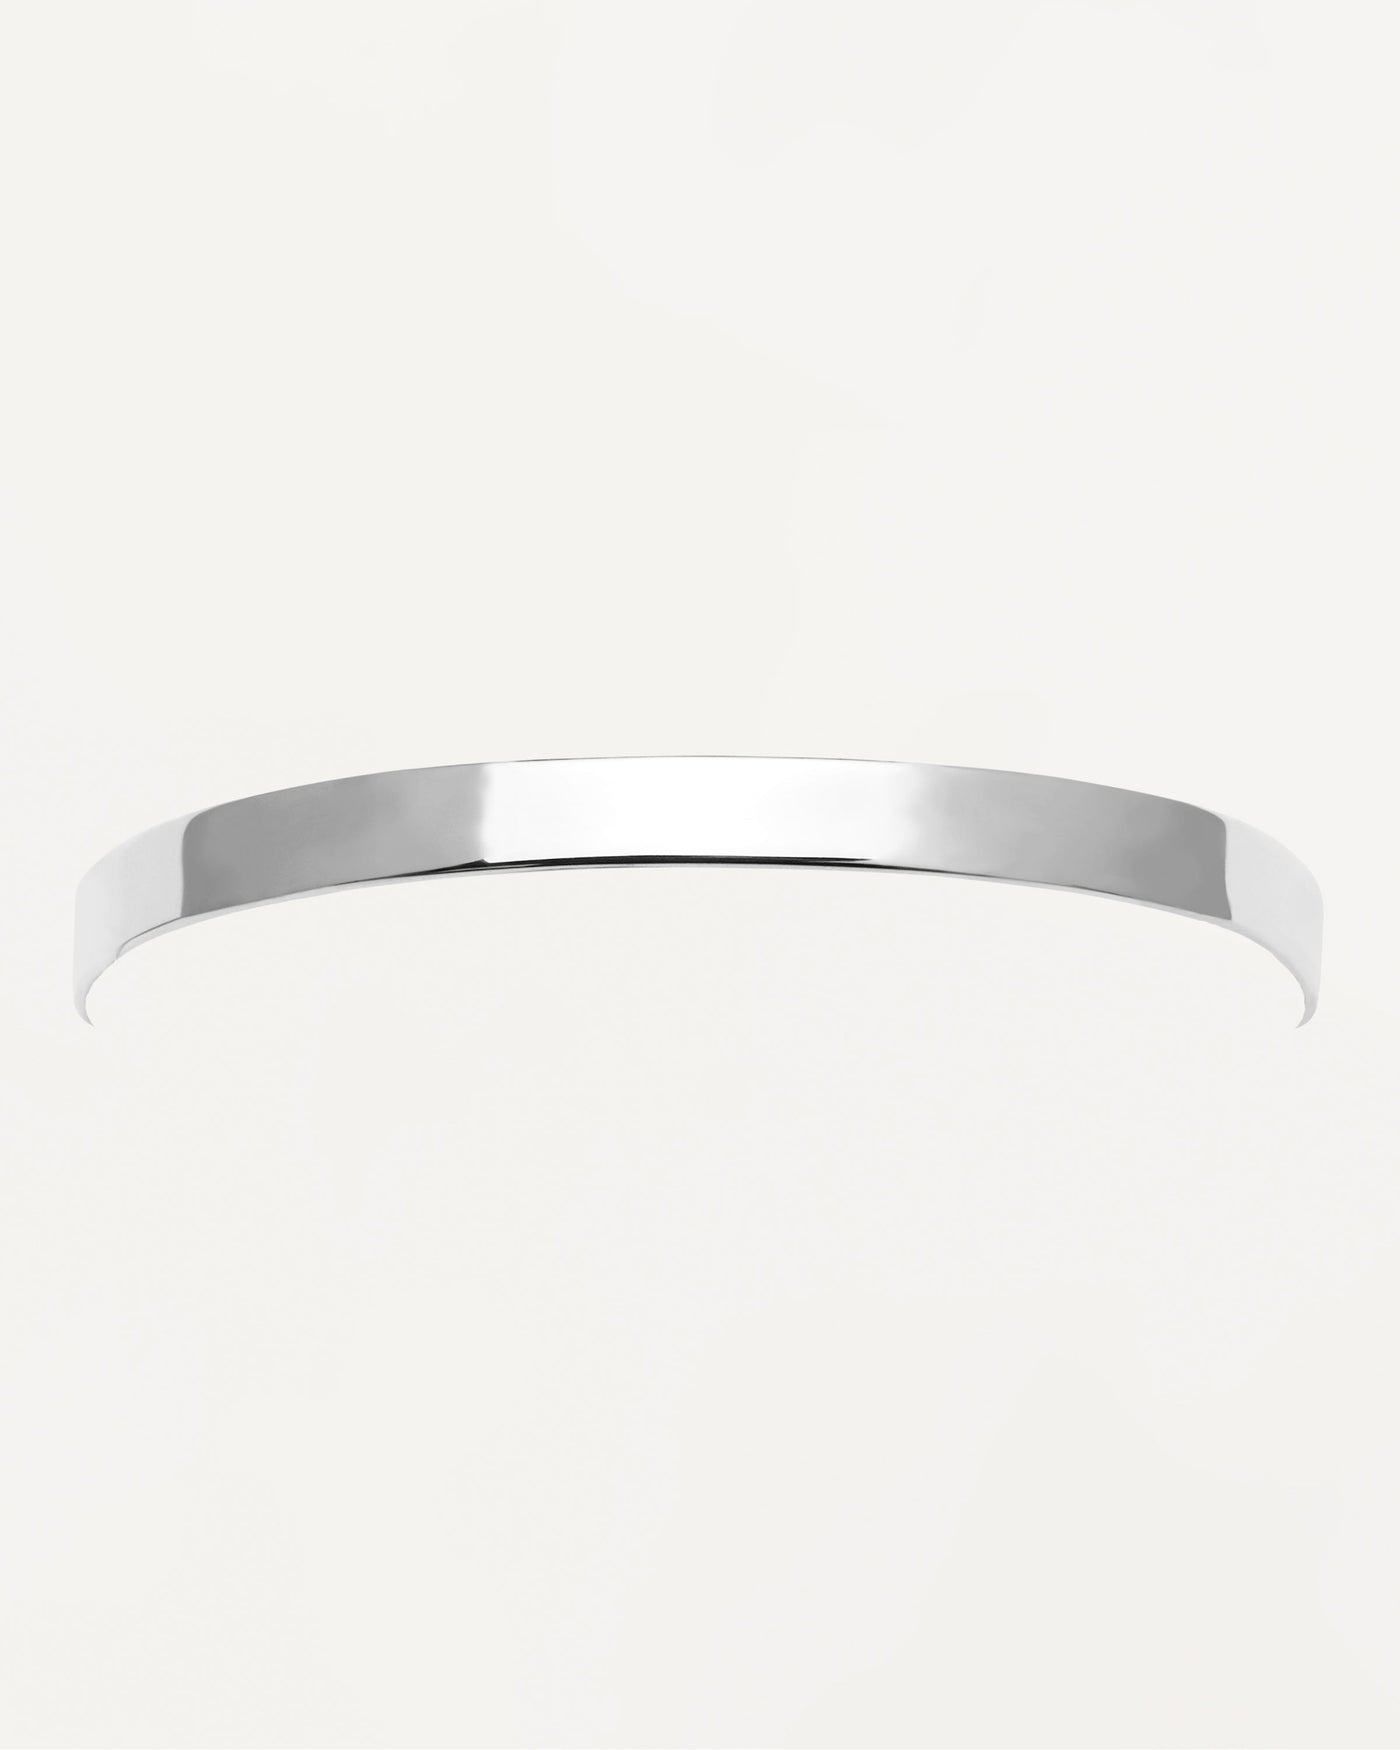 2023 Selection | Memora Silver Bracelet. Sterling silver cuff bracelet to personalize with engraving. Get the latest arrival from PDPAOLA. Place your order safely and get this Best Seller. Free Shipping.